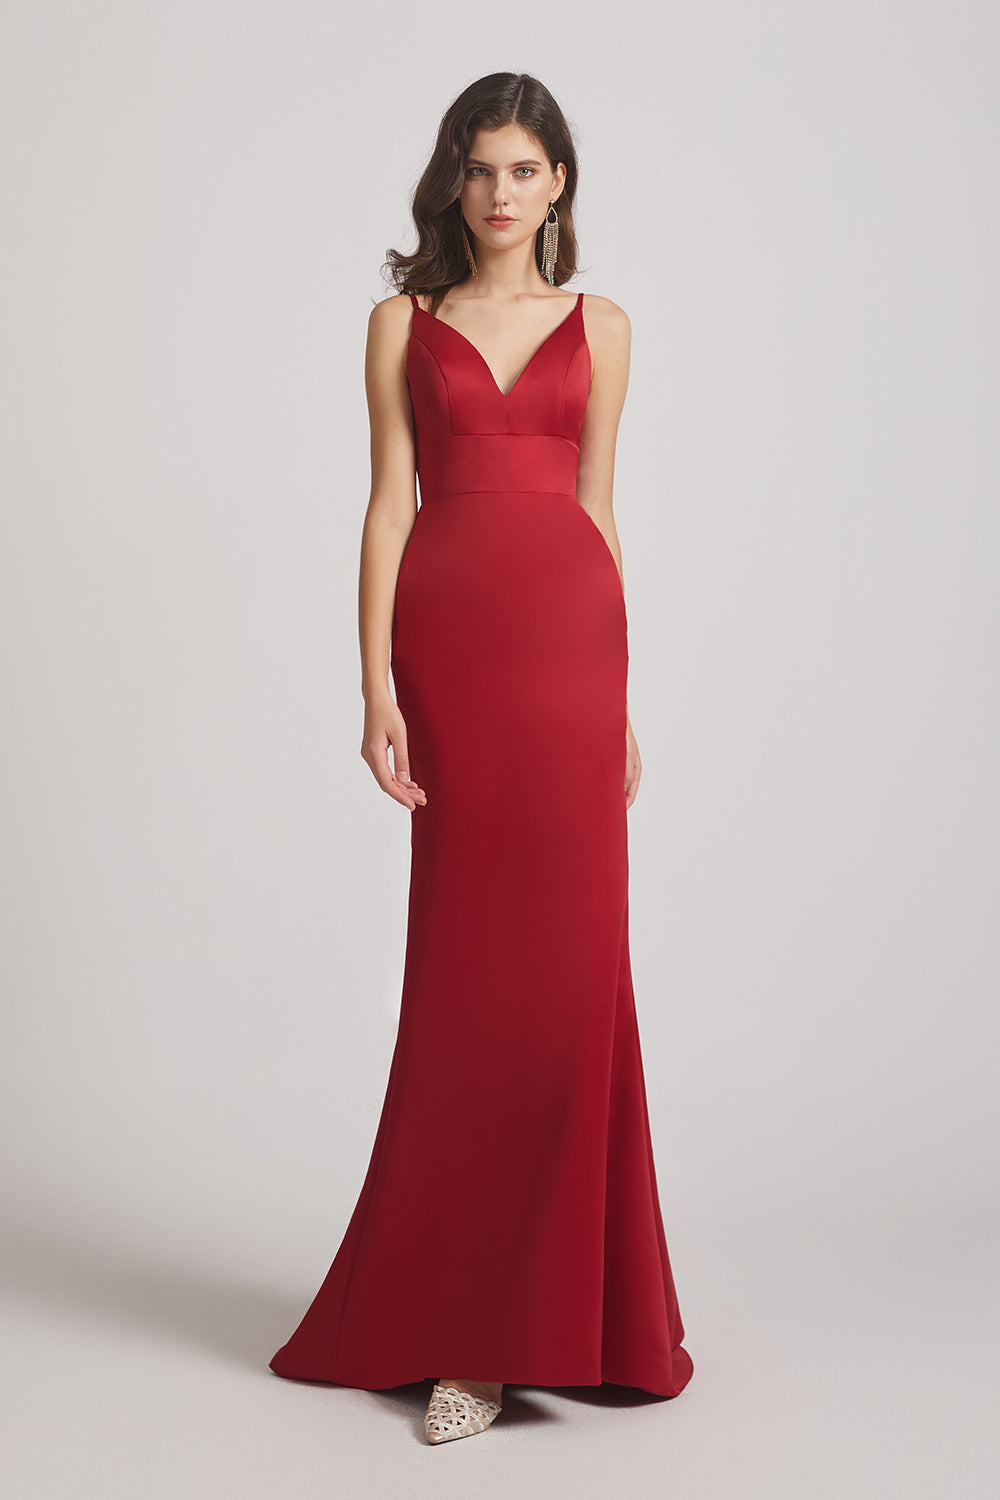 v-neck Fit and Flare Sexy Bridesmaid Dressesresses